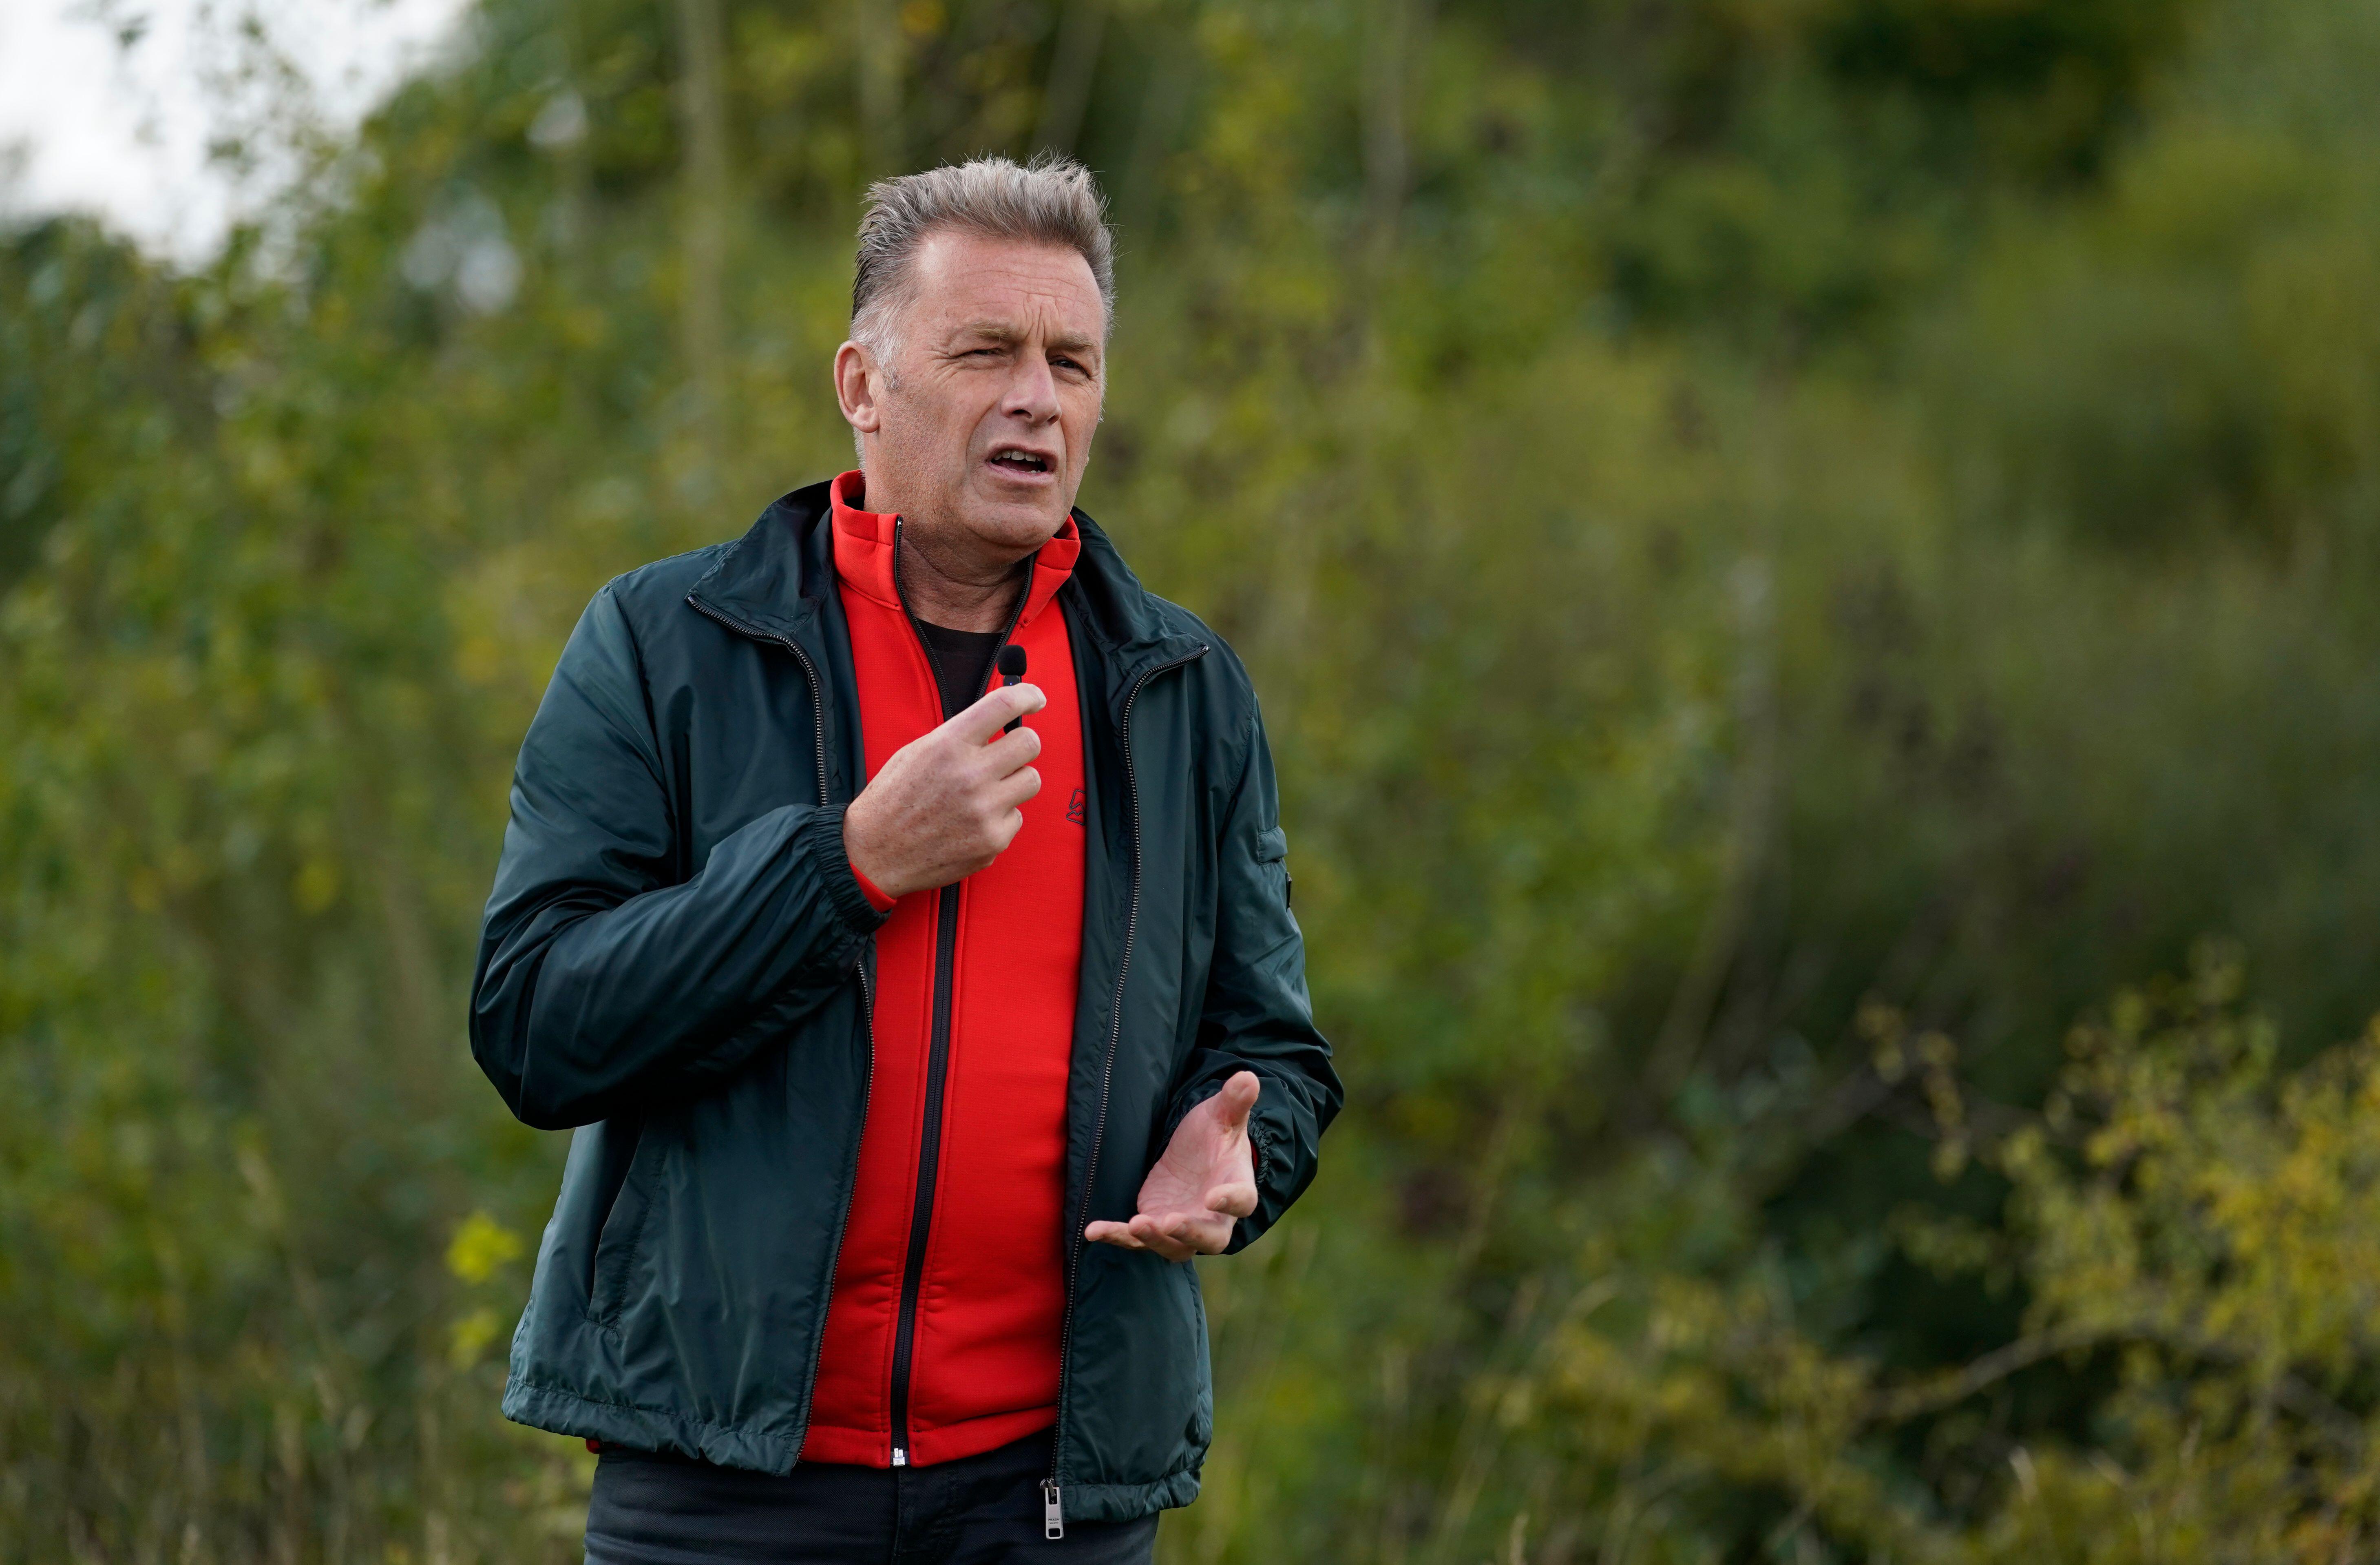 Chris Packham gives a speech to wildlife supporters